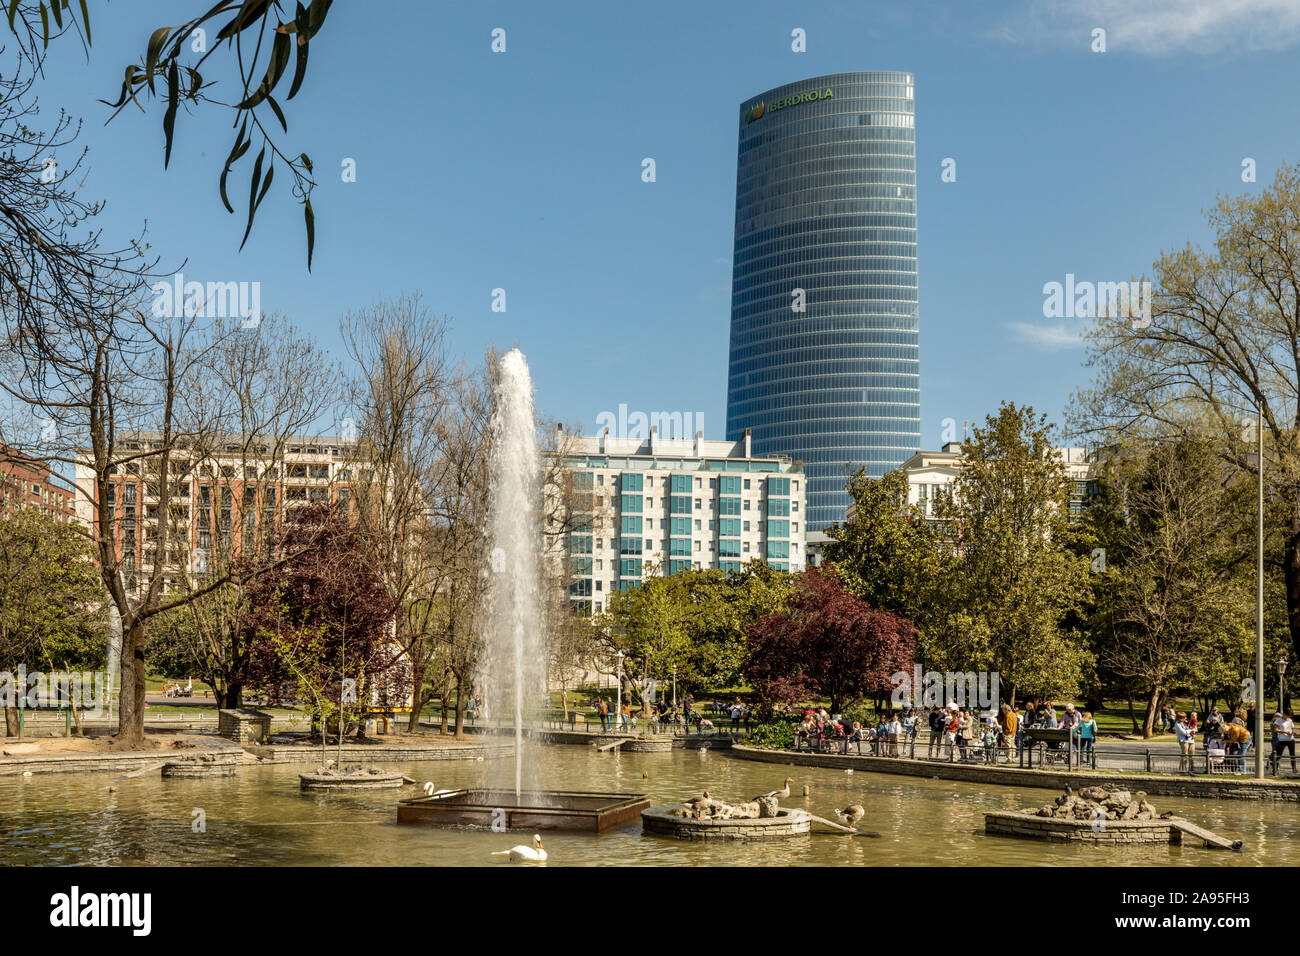 Doña Casilda Iturrizar park, also known as 'Parque de los Patos', is an urban park created in 1907 in Bilbao, Spain. Iberdrola Tower in background. Stock Photo